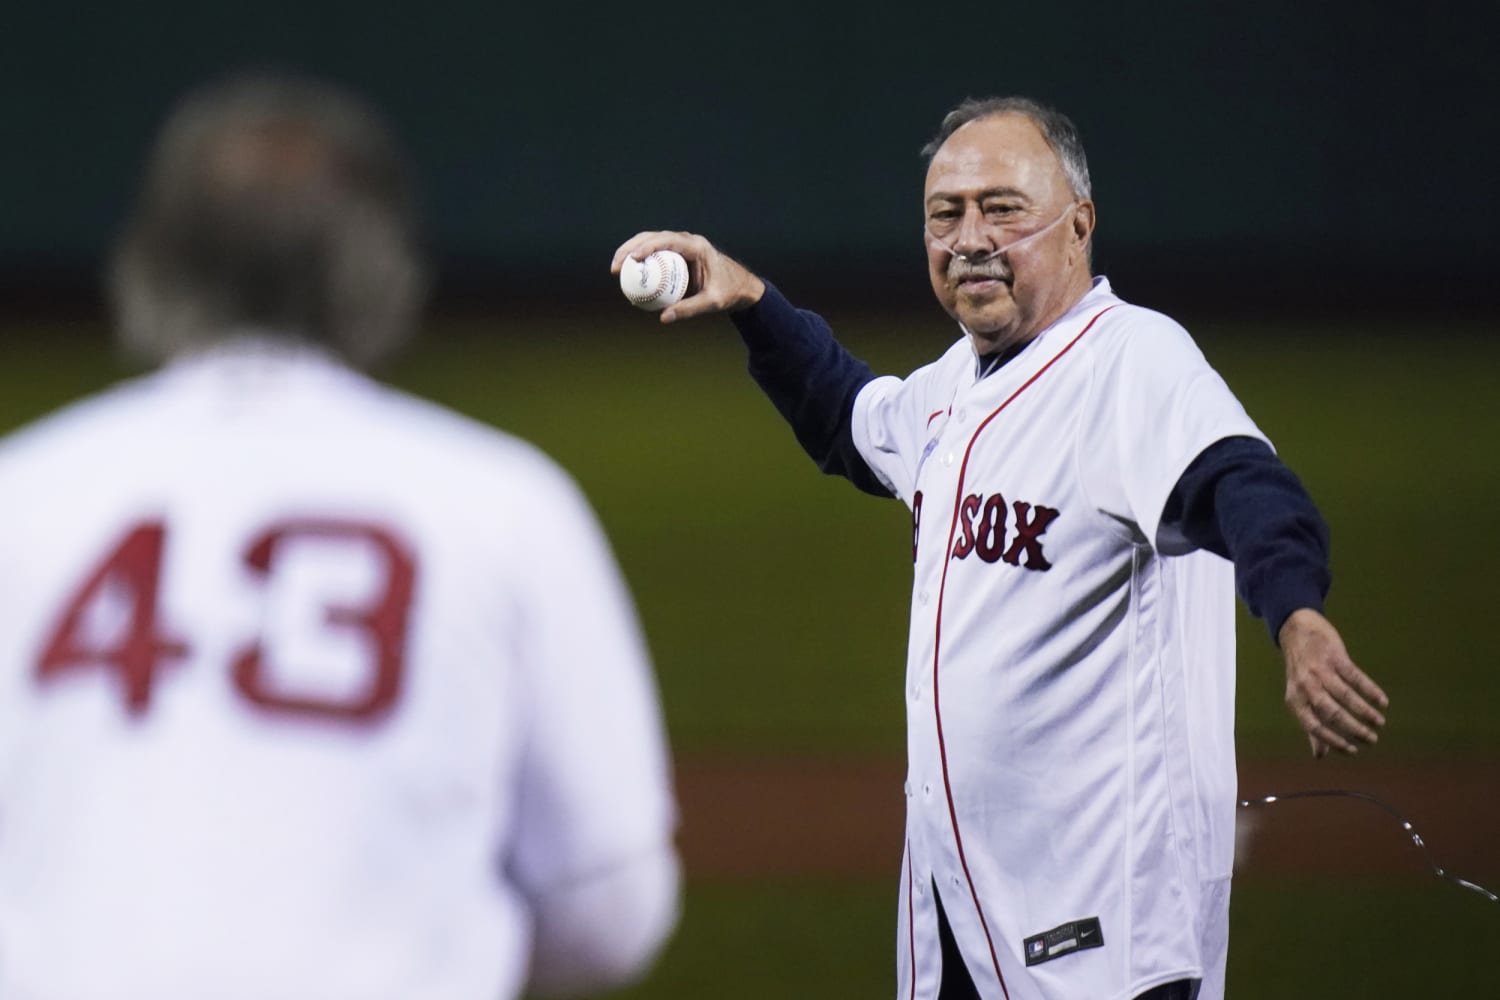 Jerry Remy tribute: Red Sox to wear #2 patch this season in honor of  RemDawg – Boston 25 News